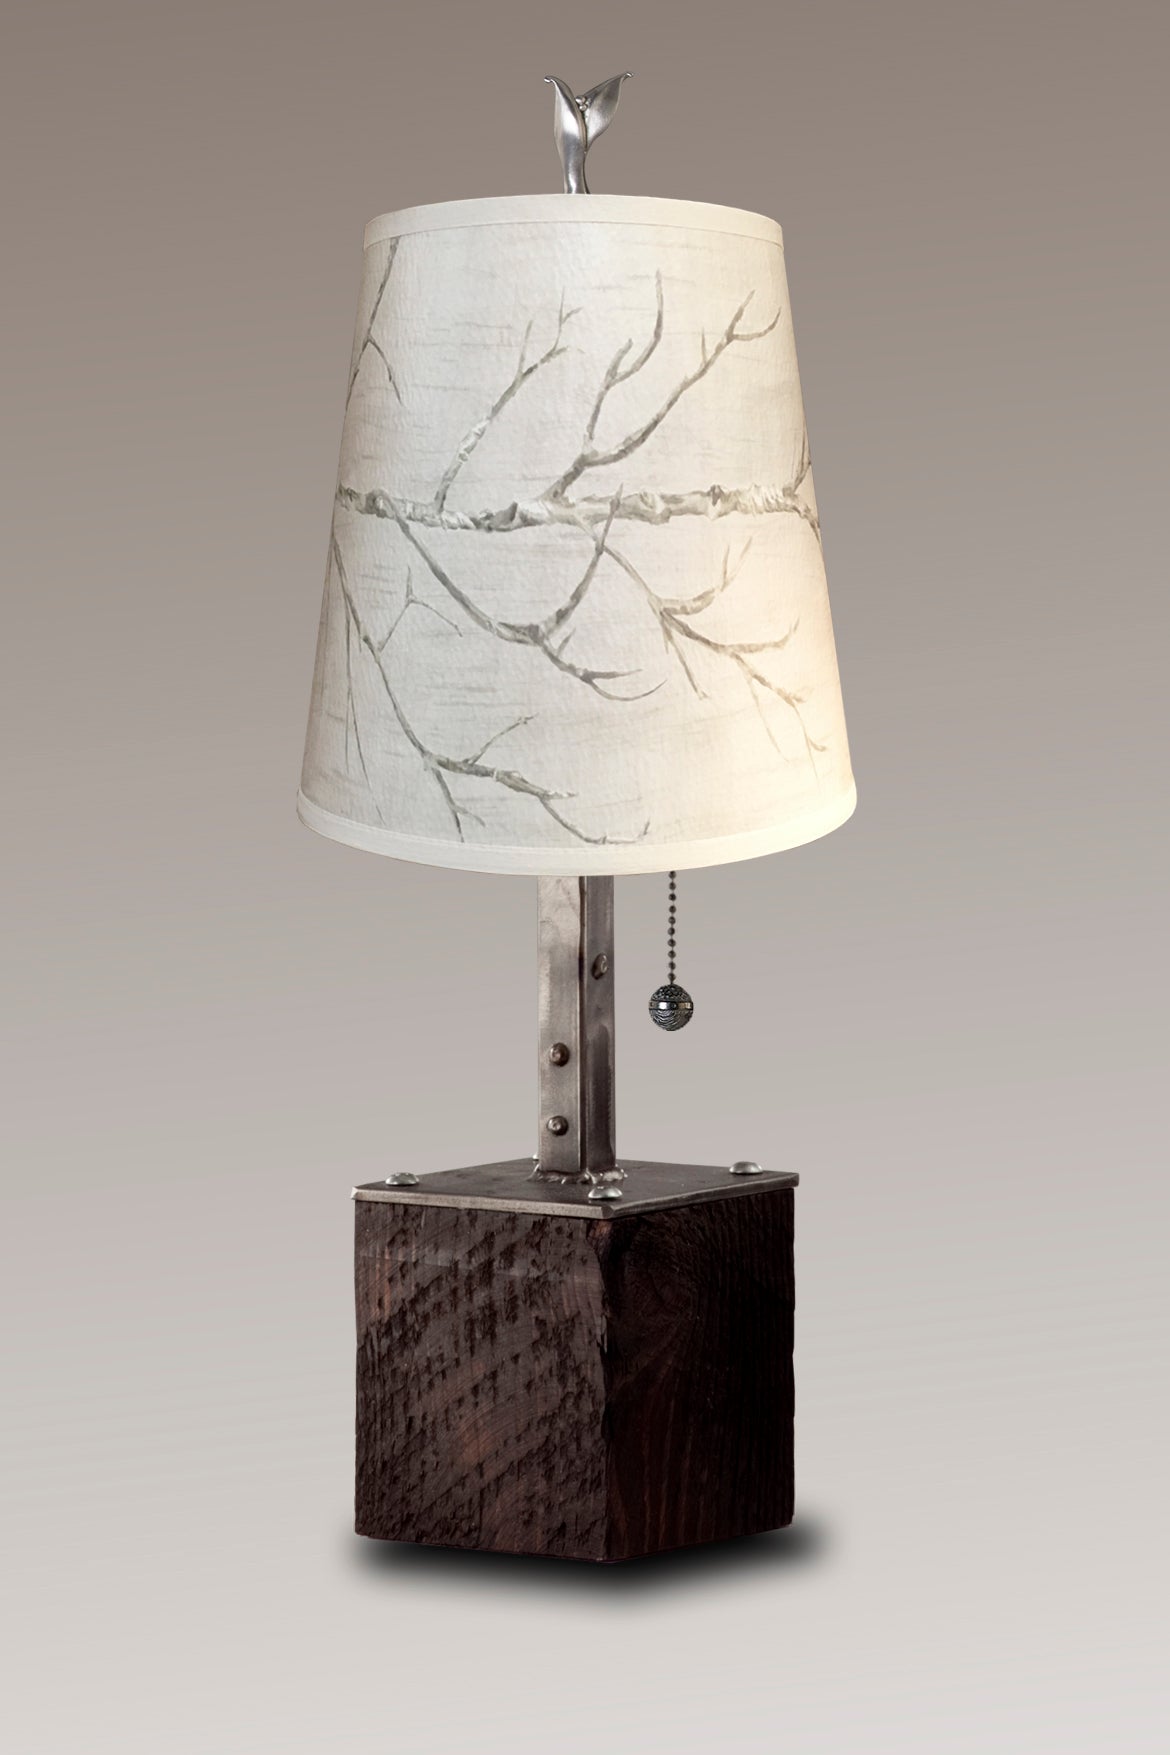 Janna Ugone &amp; Co Table Lamps Steel Table Lamp on Reclaimed Wood with Small Drum Shade in Sweeping Branch